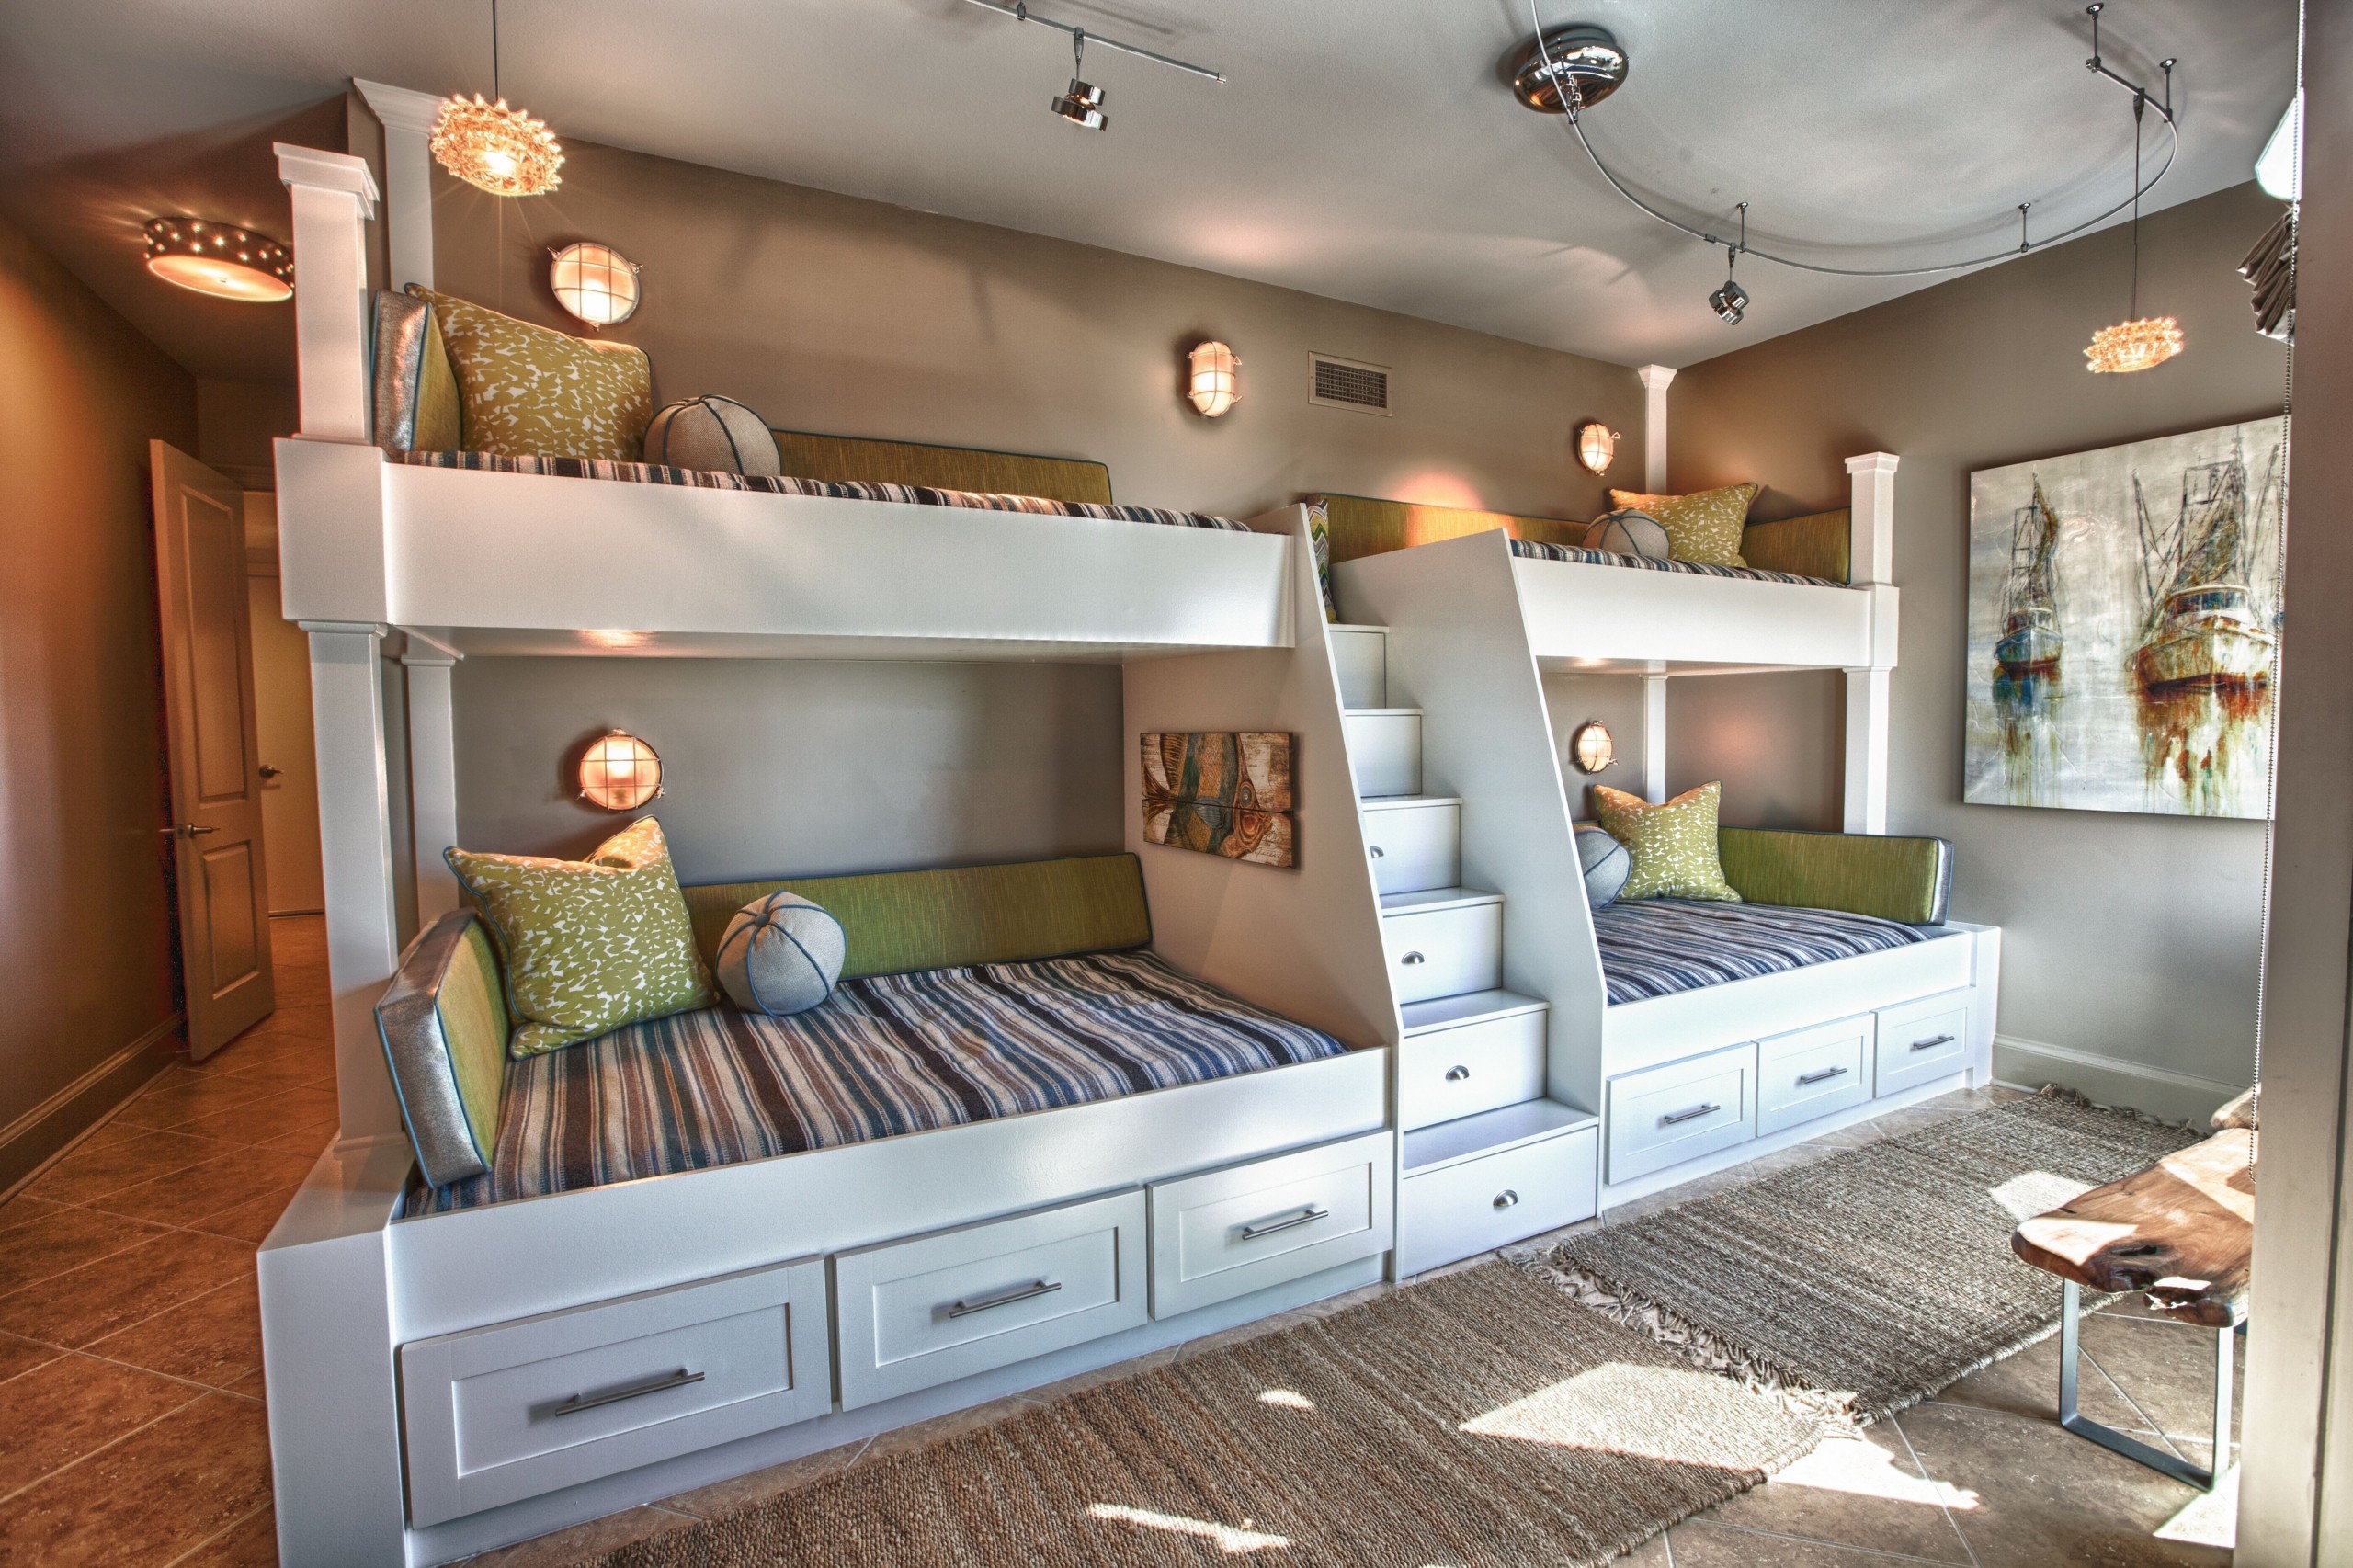 two bunk beds with desk